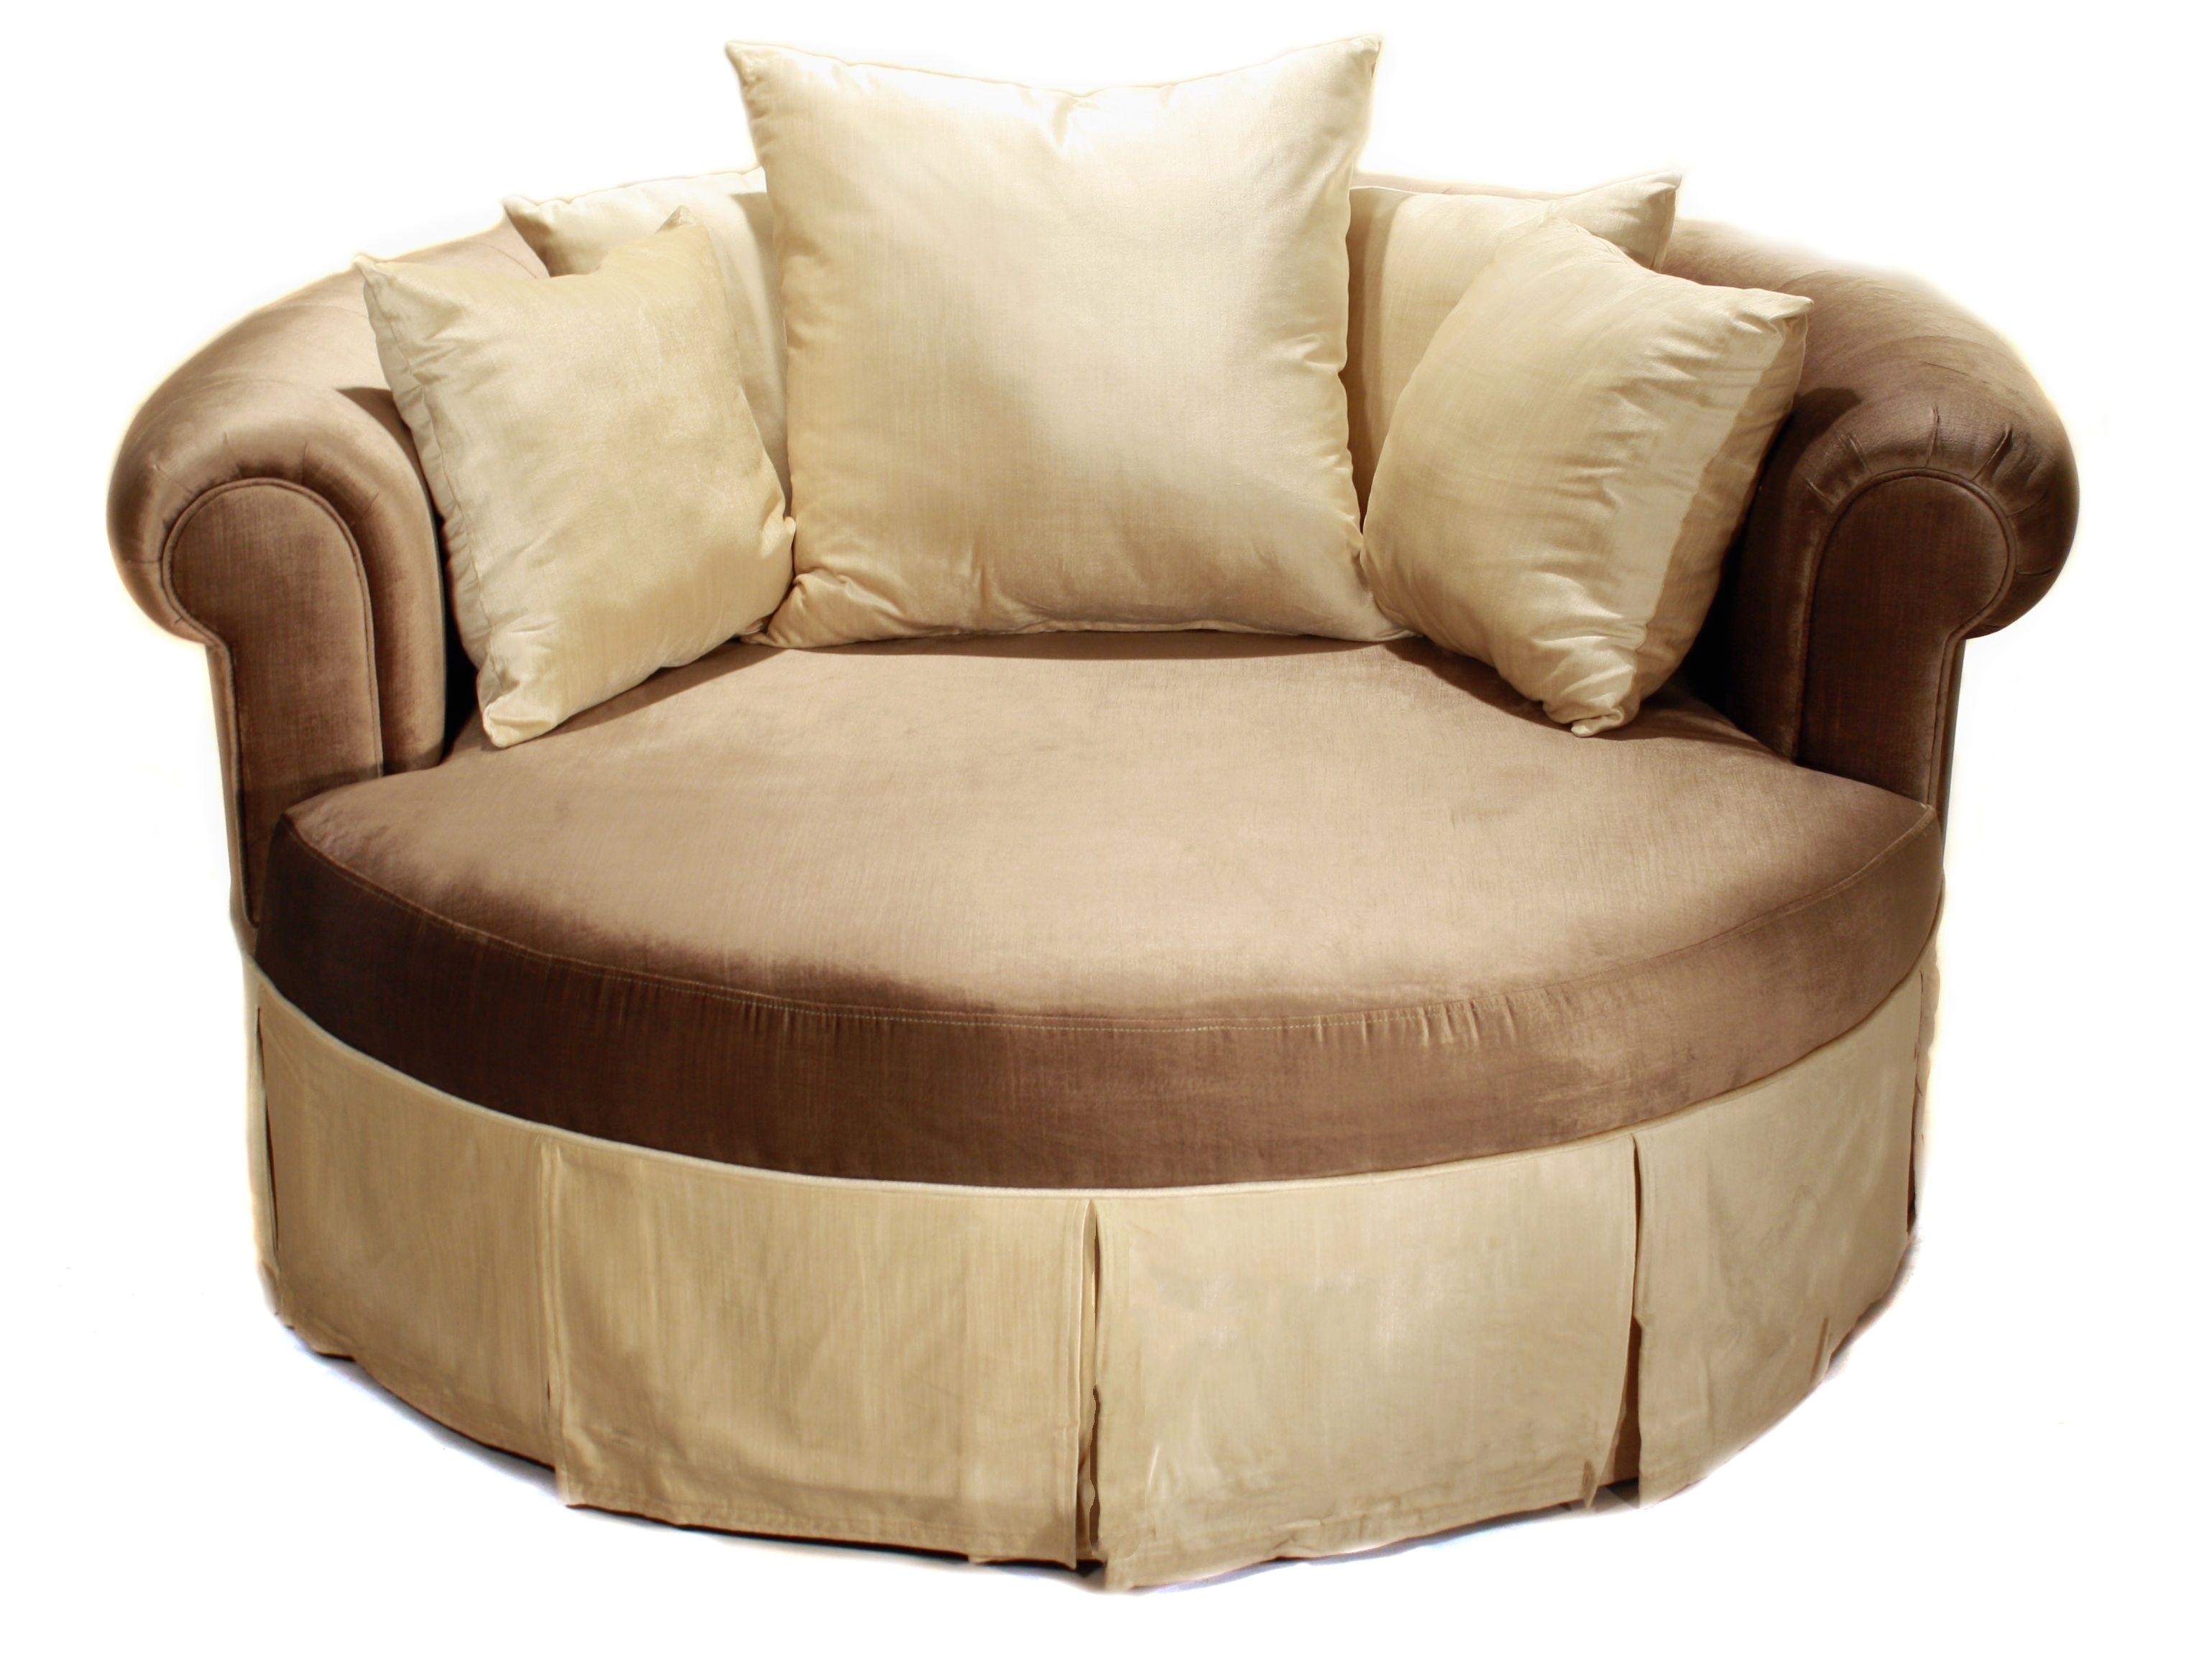 Overstuffed Chair Cover Elegant Armchair Arm Covers Lumsden Homes